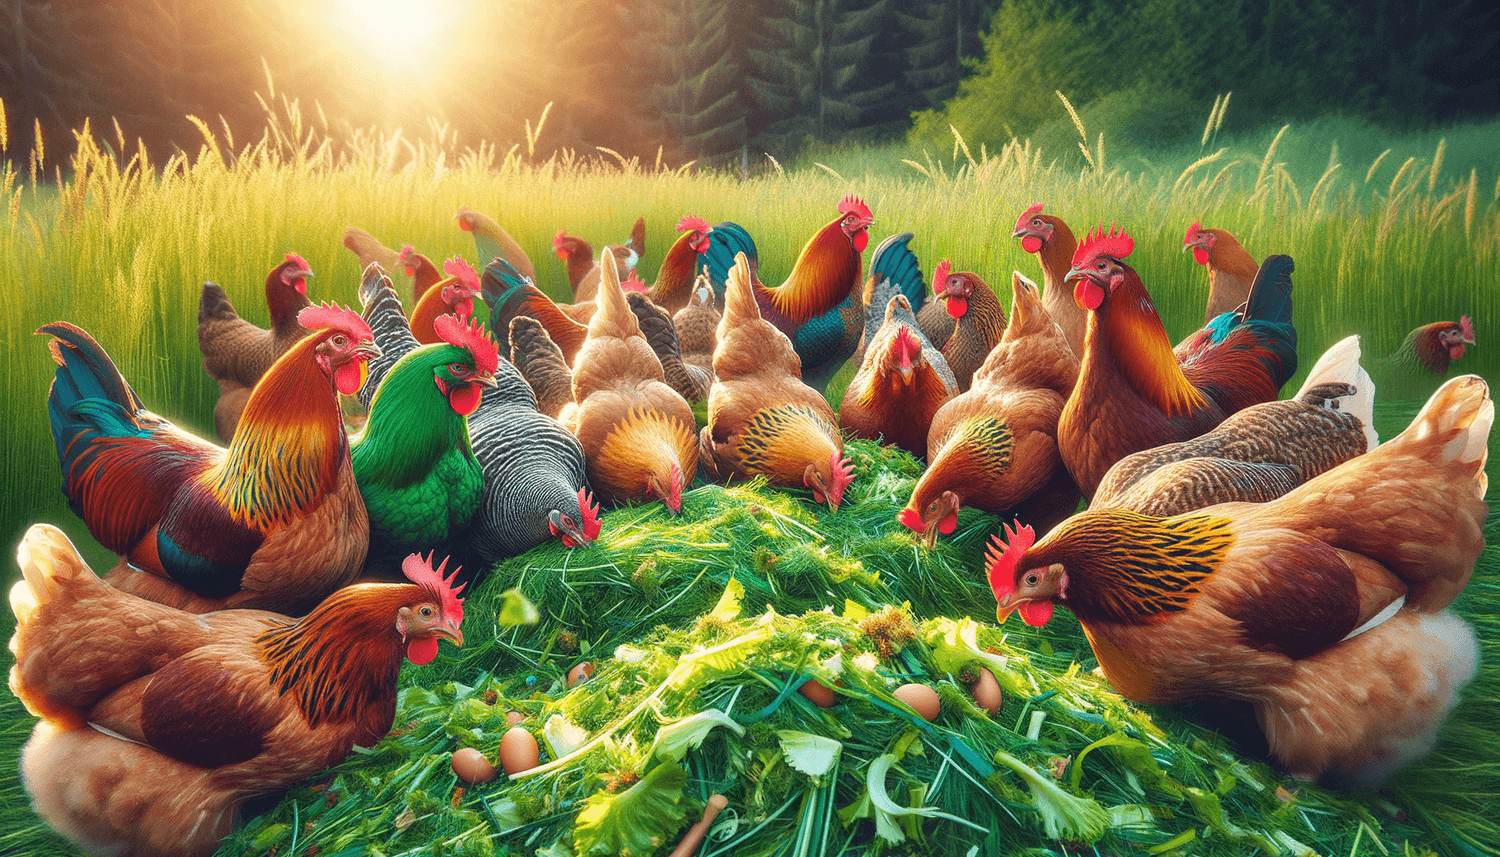 Can Chickens Eat Lawn Clippings?